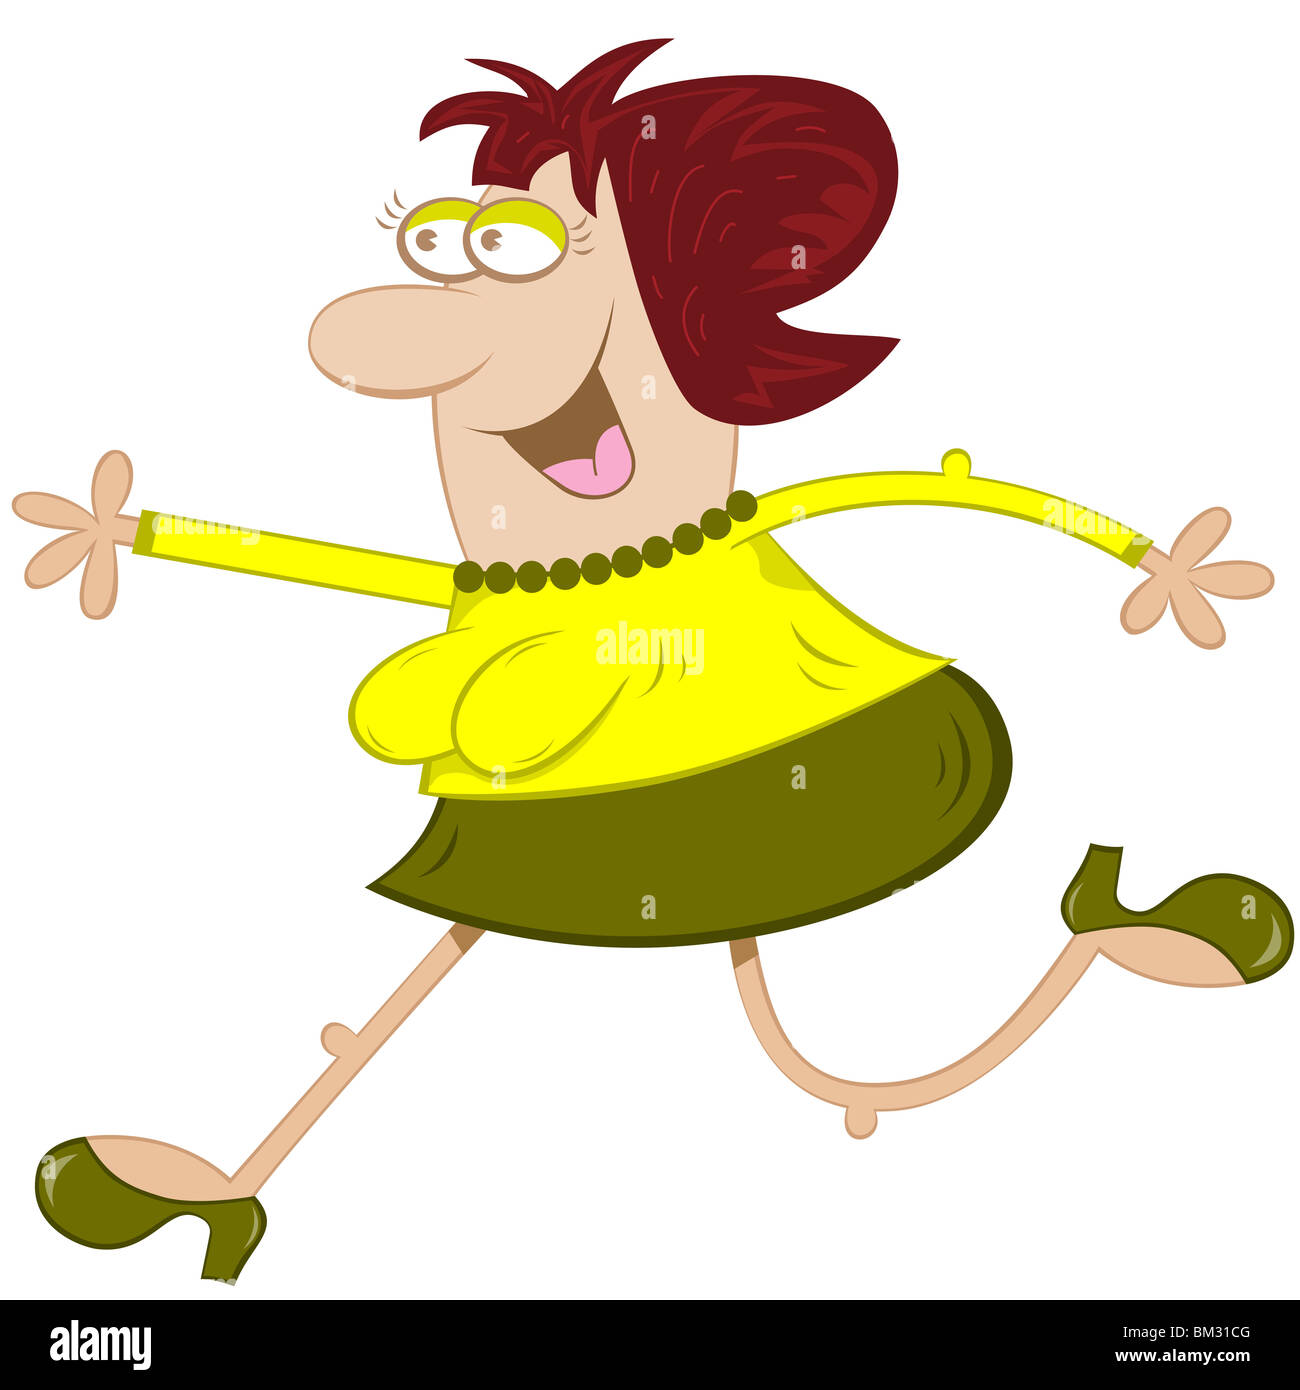 Cartoon character with skinny legs and fat body